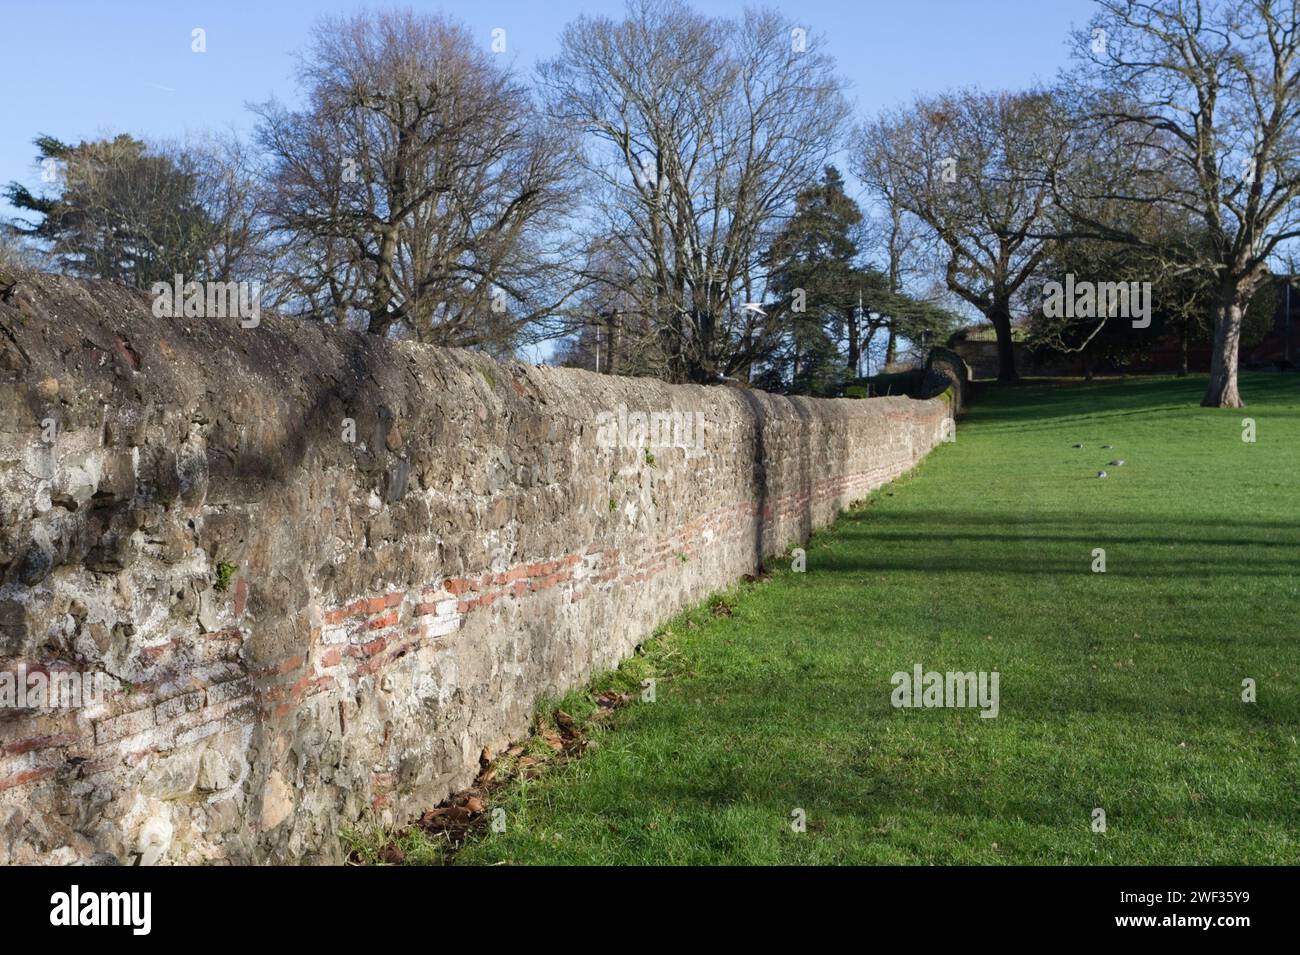 Part of the Roman wall in Castle Park, Colchester, Essex. Colchester has the earliest and best-preserved Roman town wall in Britain. Stock Photo